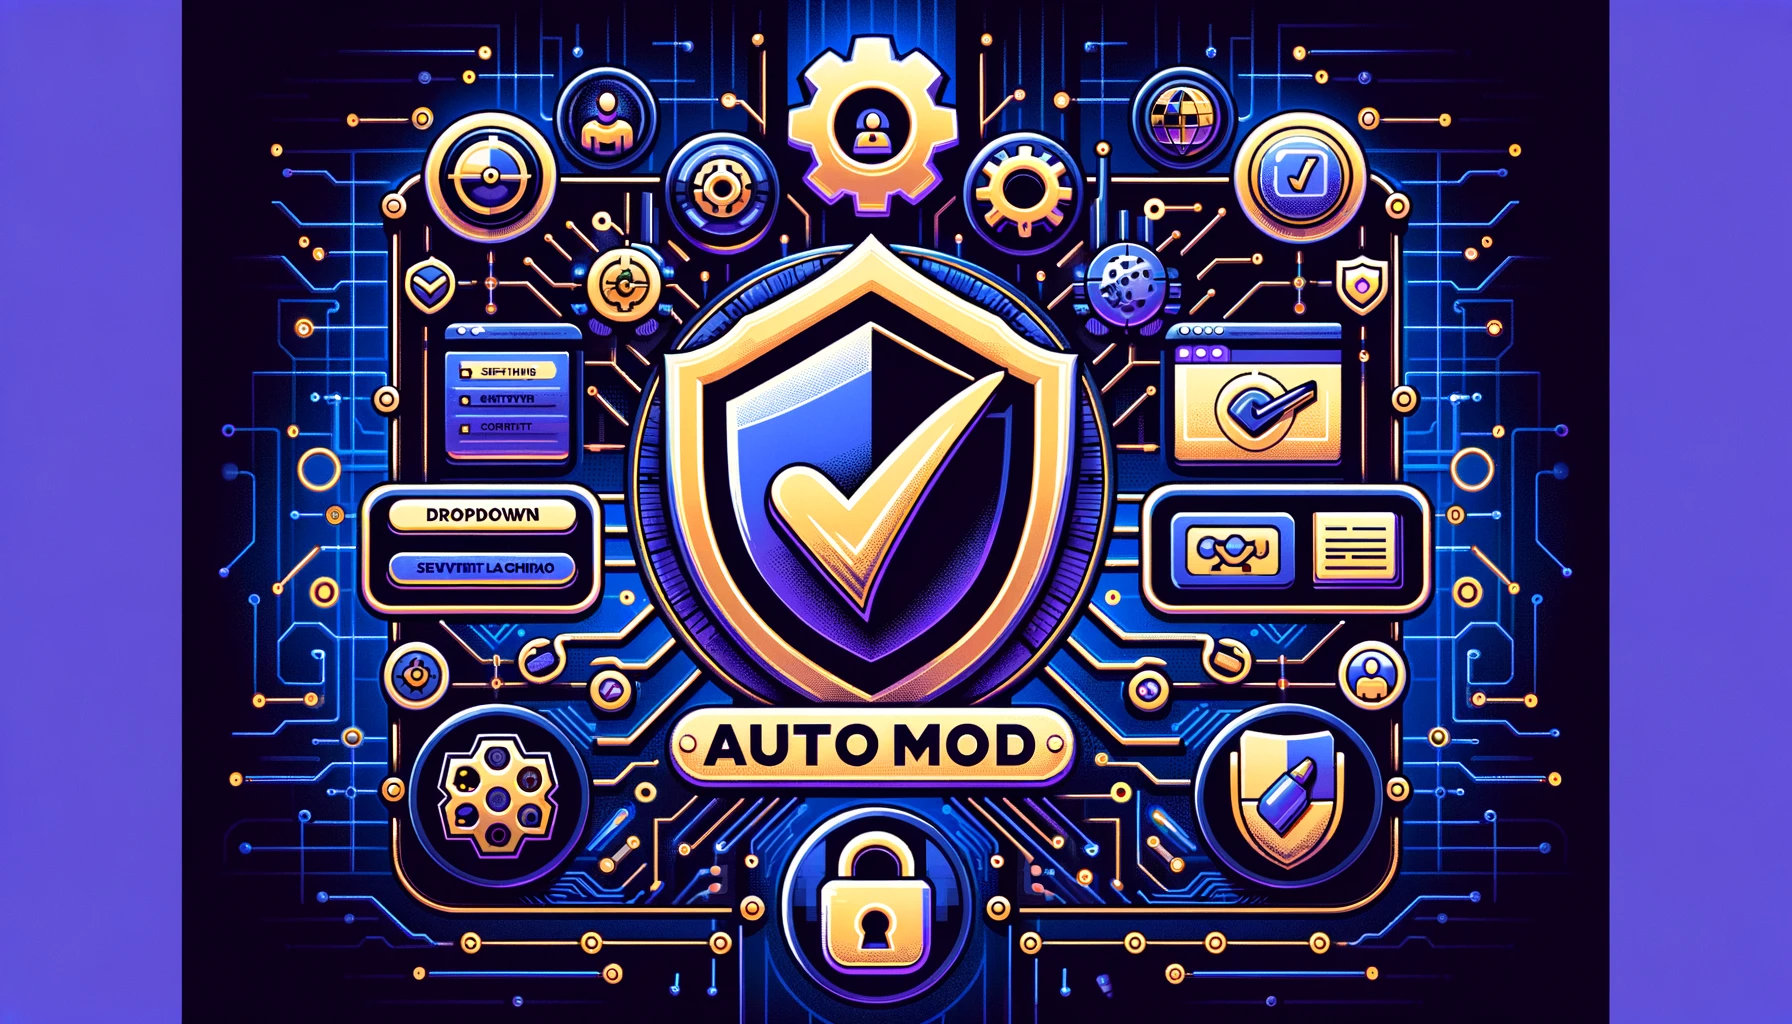 Setting Up Discord's AutoMod for Safer Communities